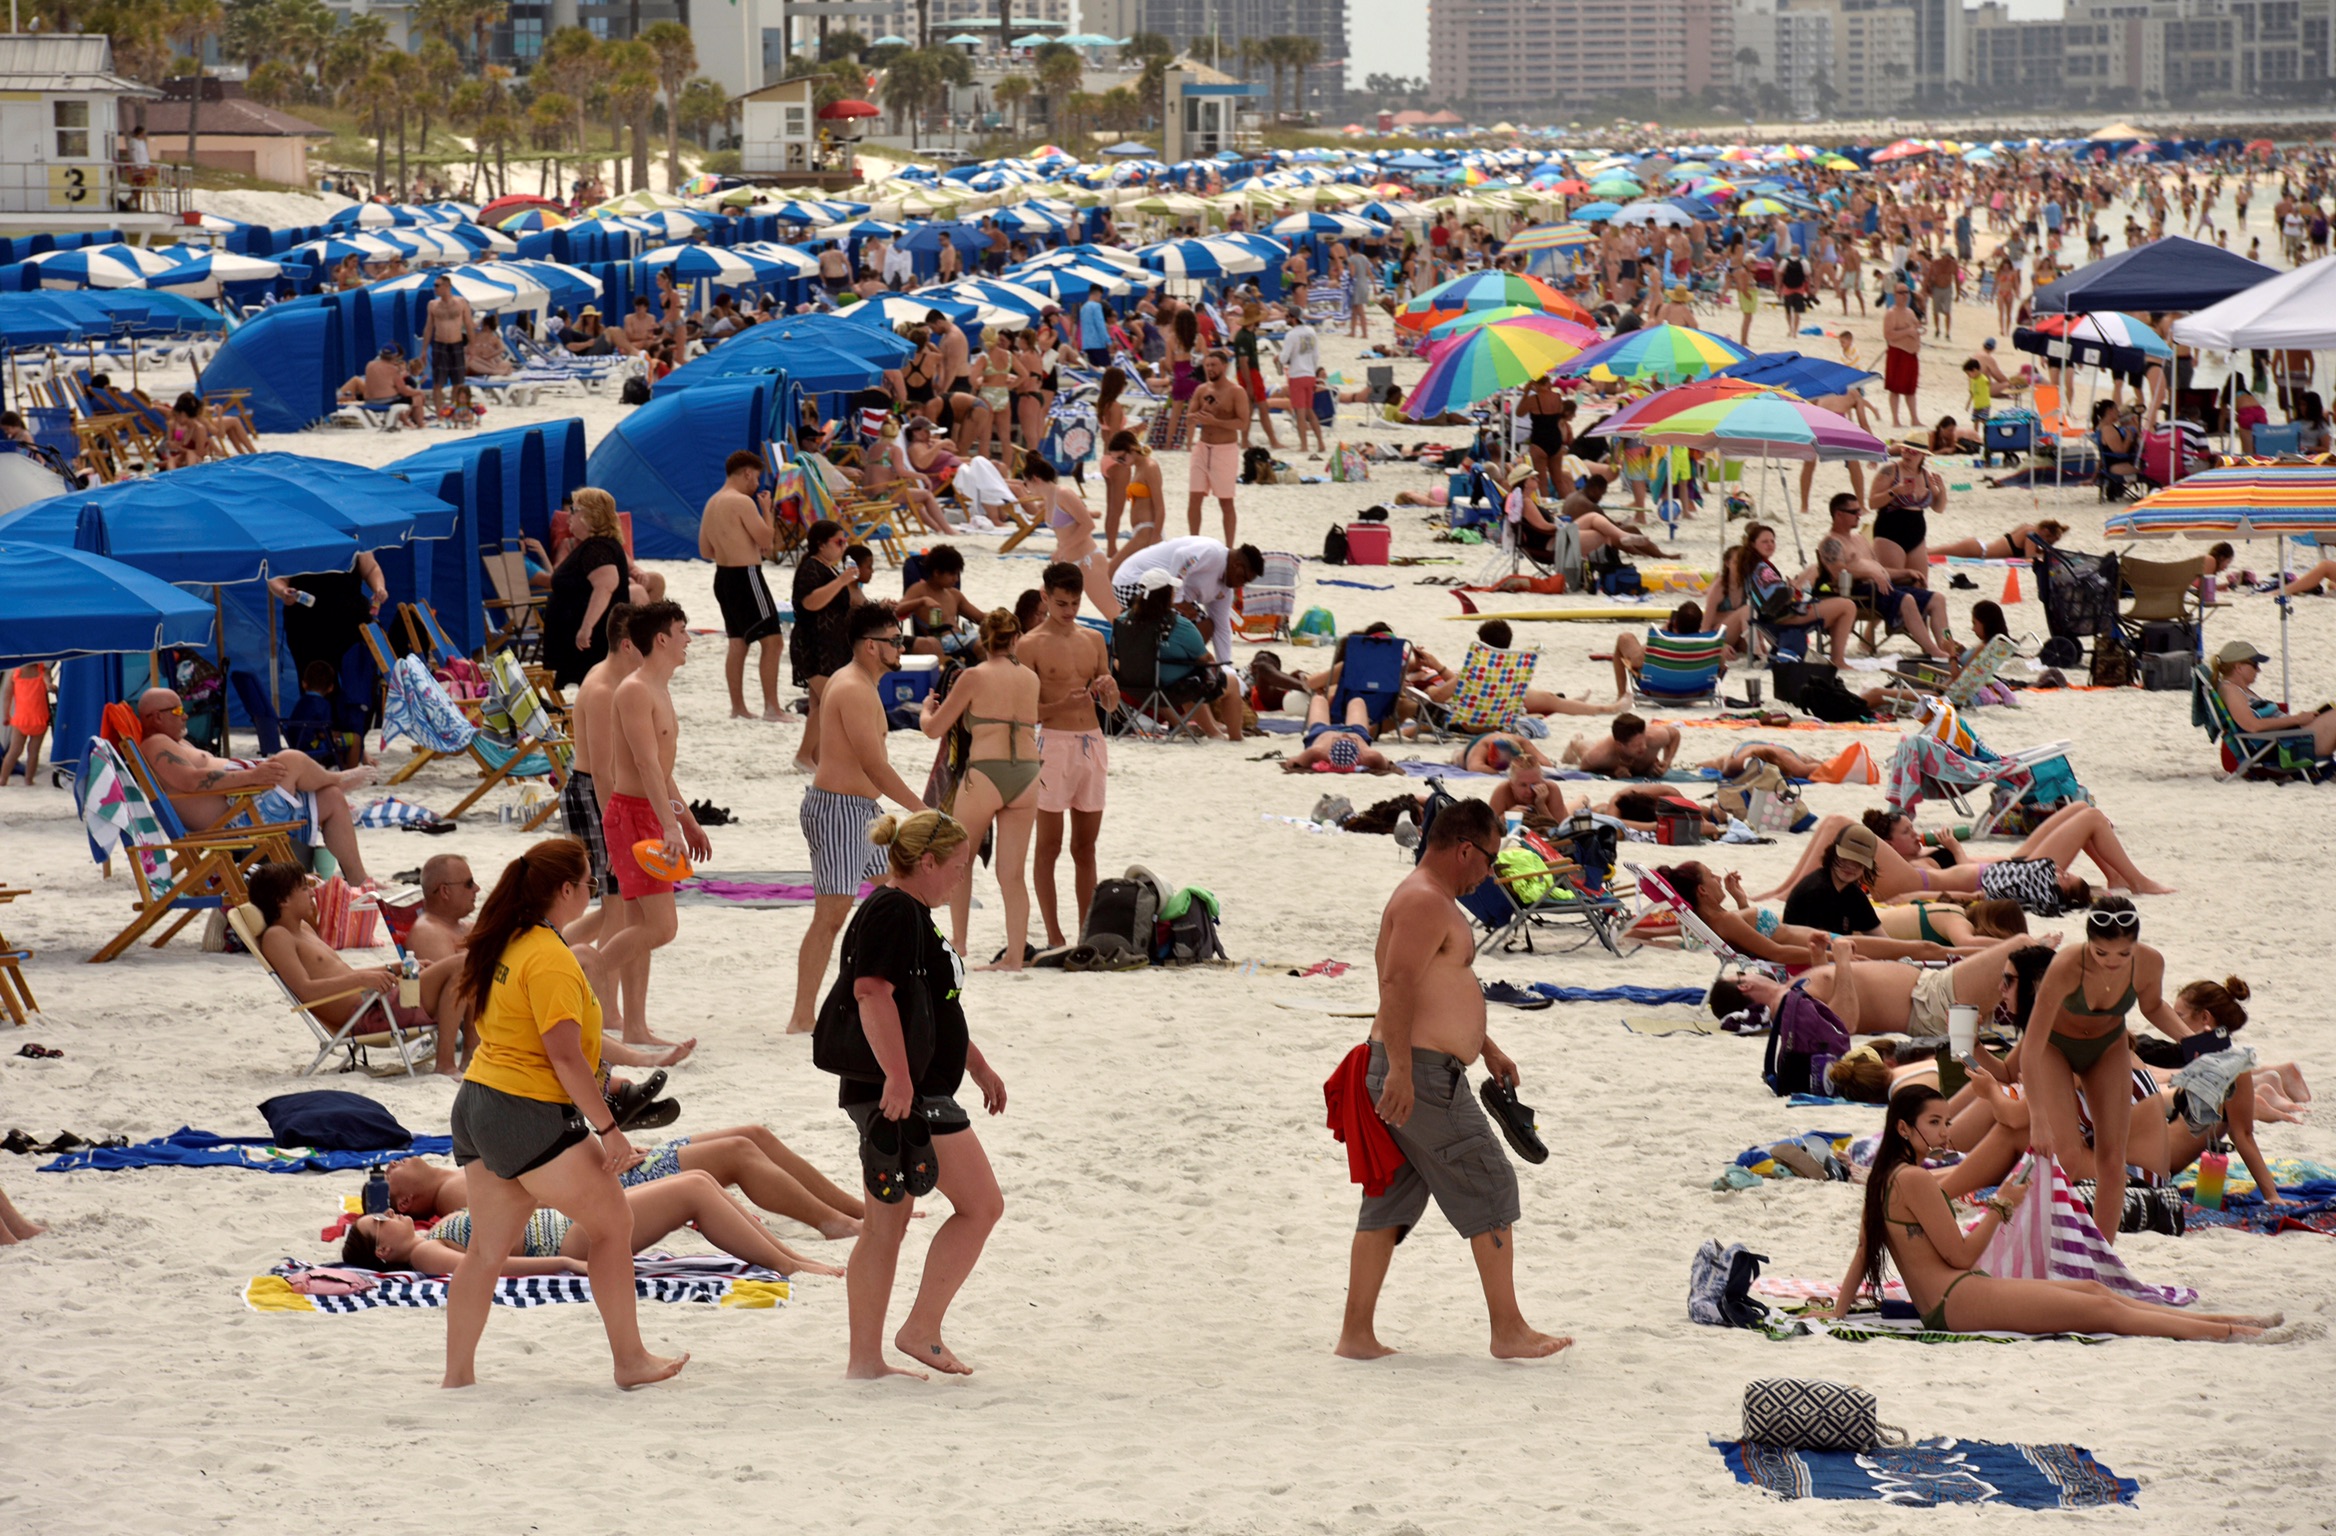 FILE PHOTO: People crowd the beach, while other jurisdictions had already closed theirs in efforts to combat the spread of novel coronavirus disease (COVID-19) in Clearwater, Florida, U.S. March 17, 2020. REUTERS/Steve Nesius/File Photo